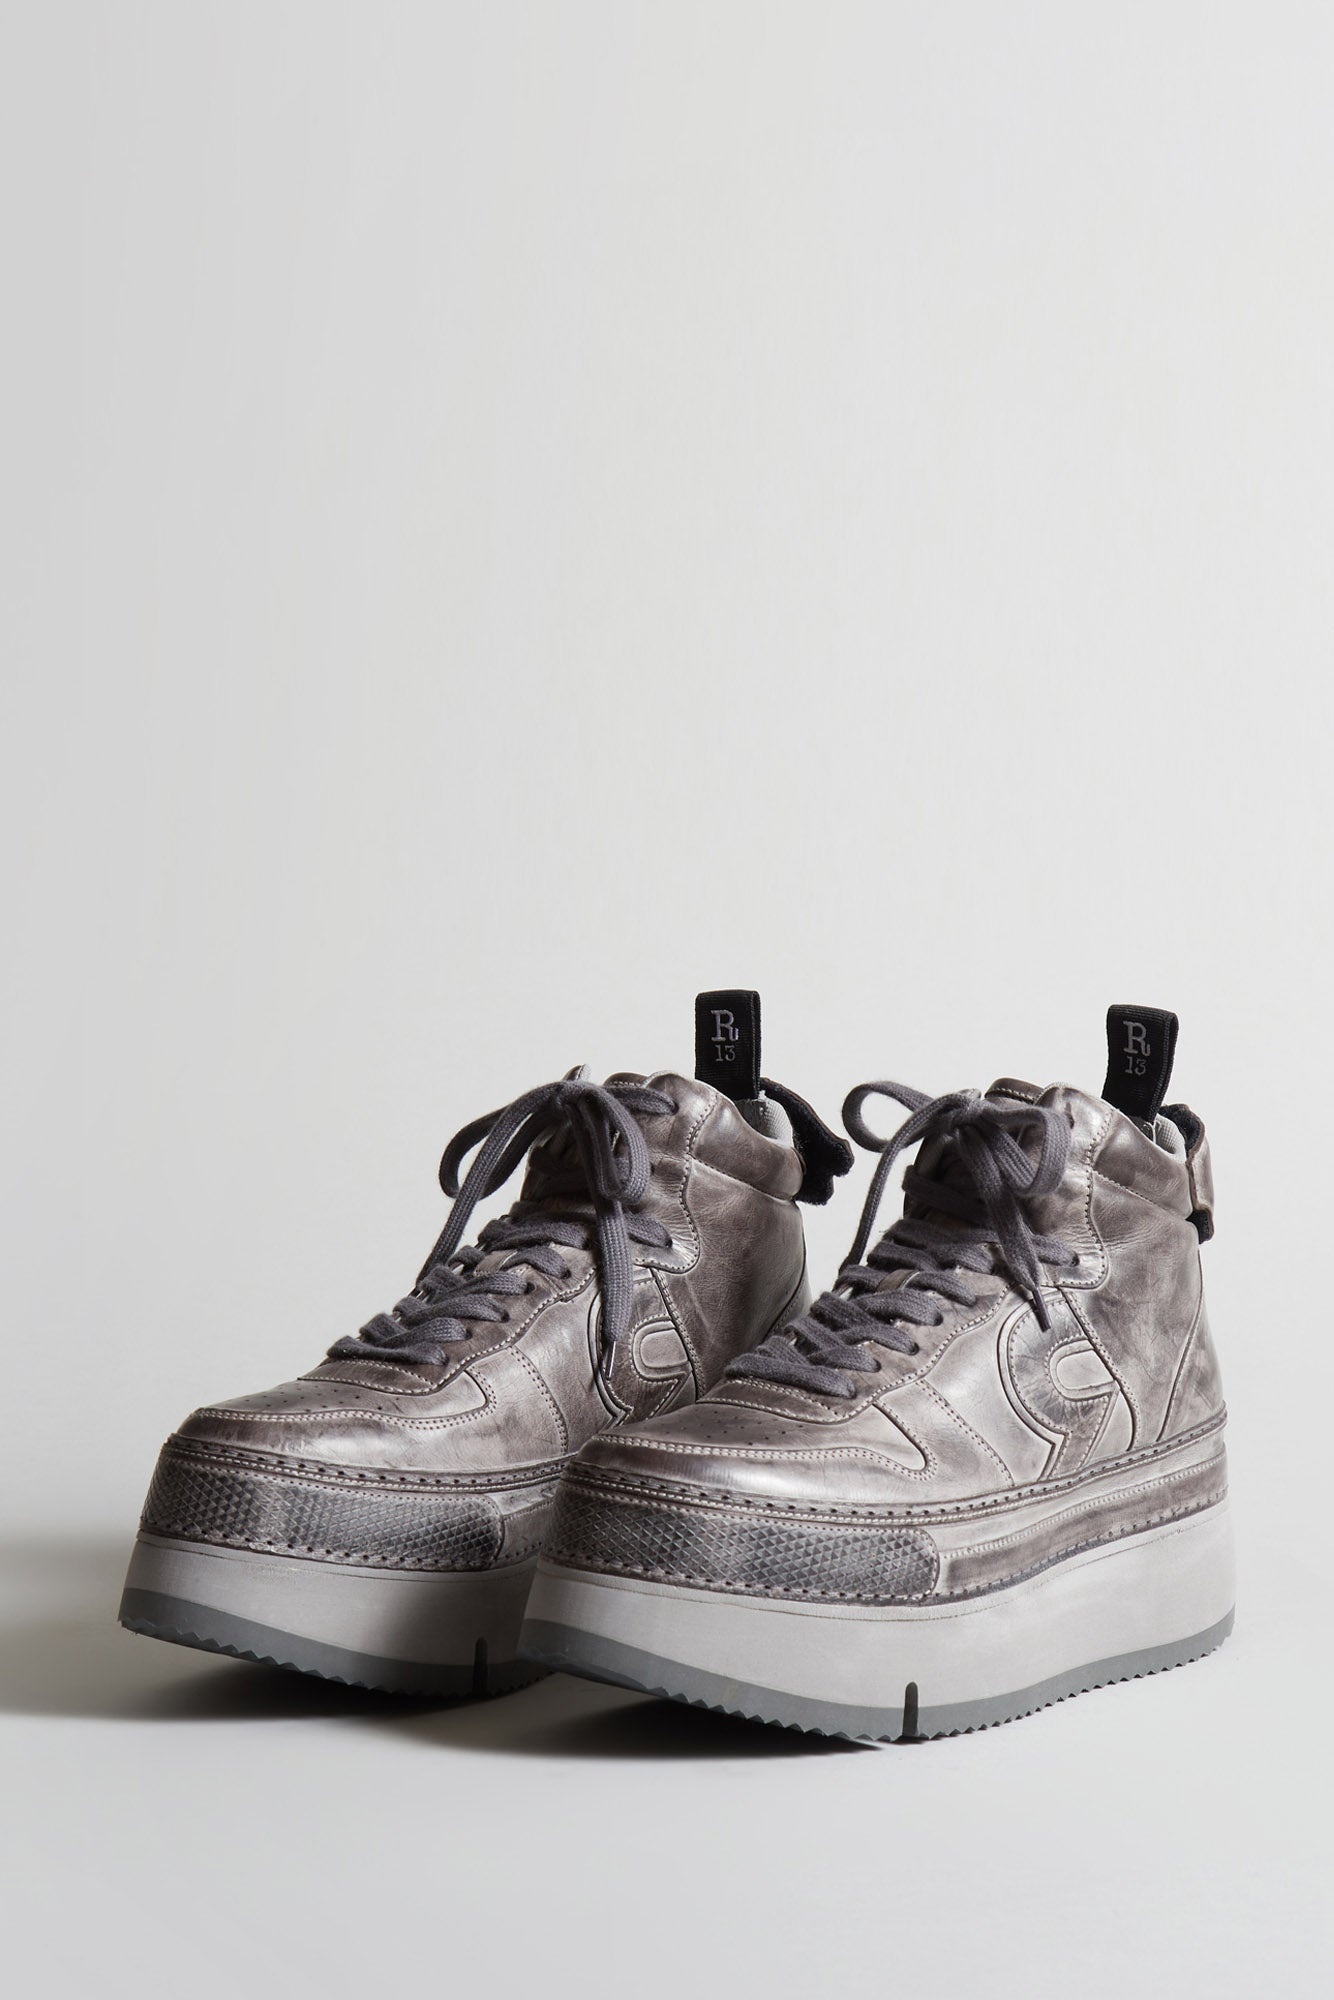 THE RIOT SNEAKER - DISTRESSED GREY LEATHER - 1